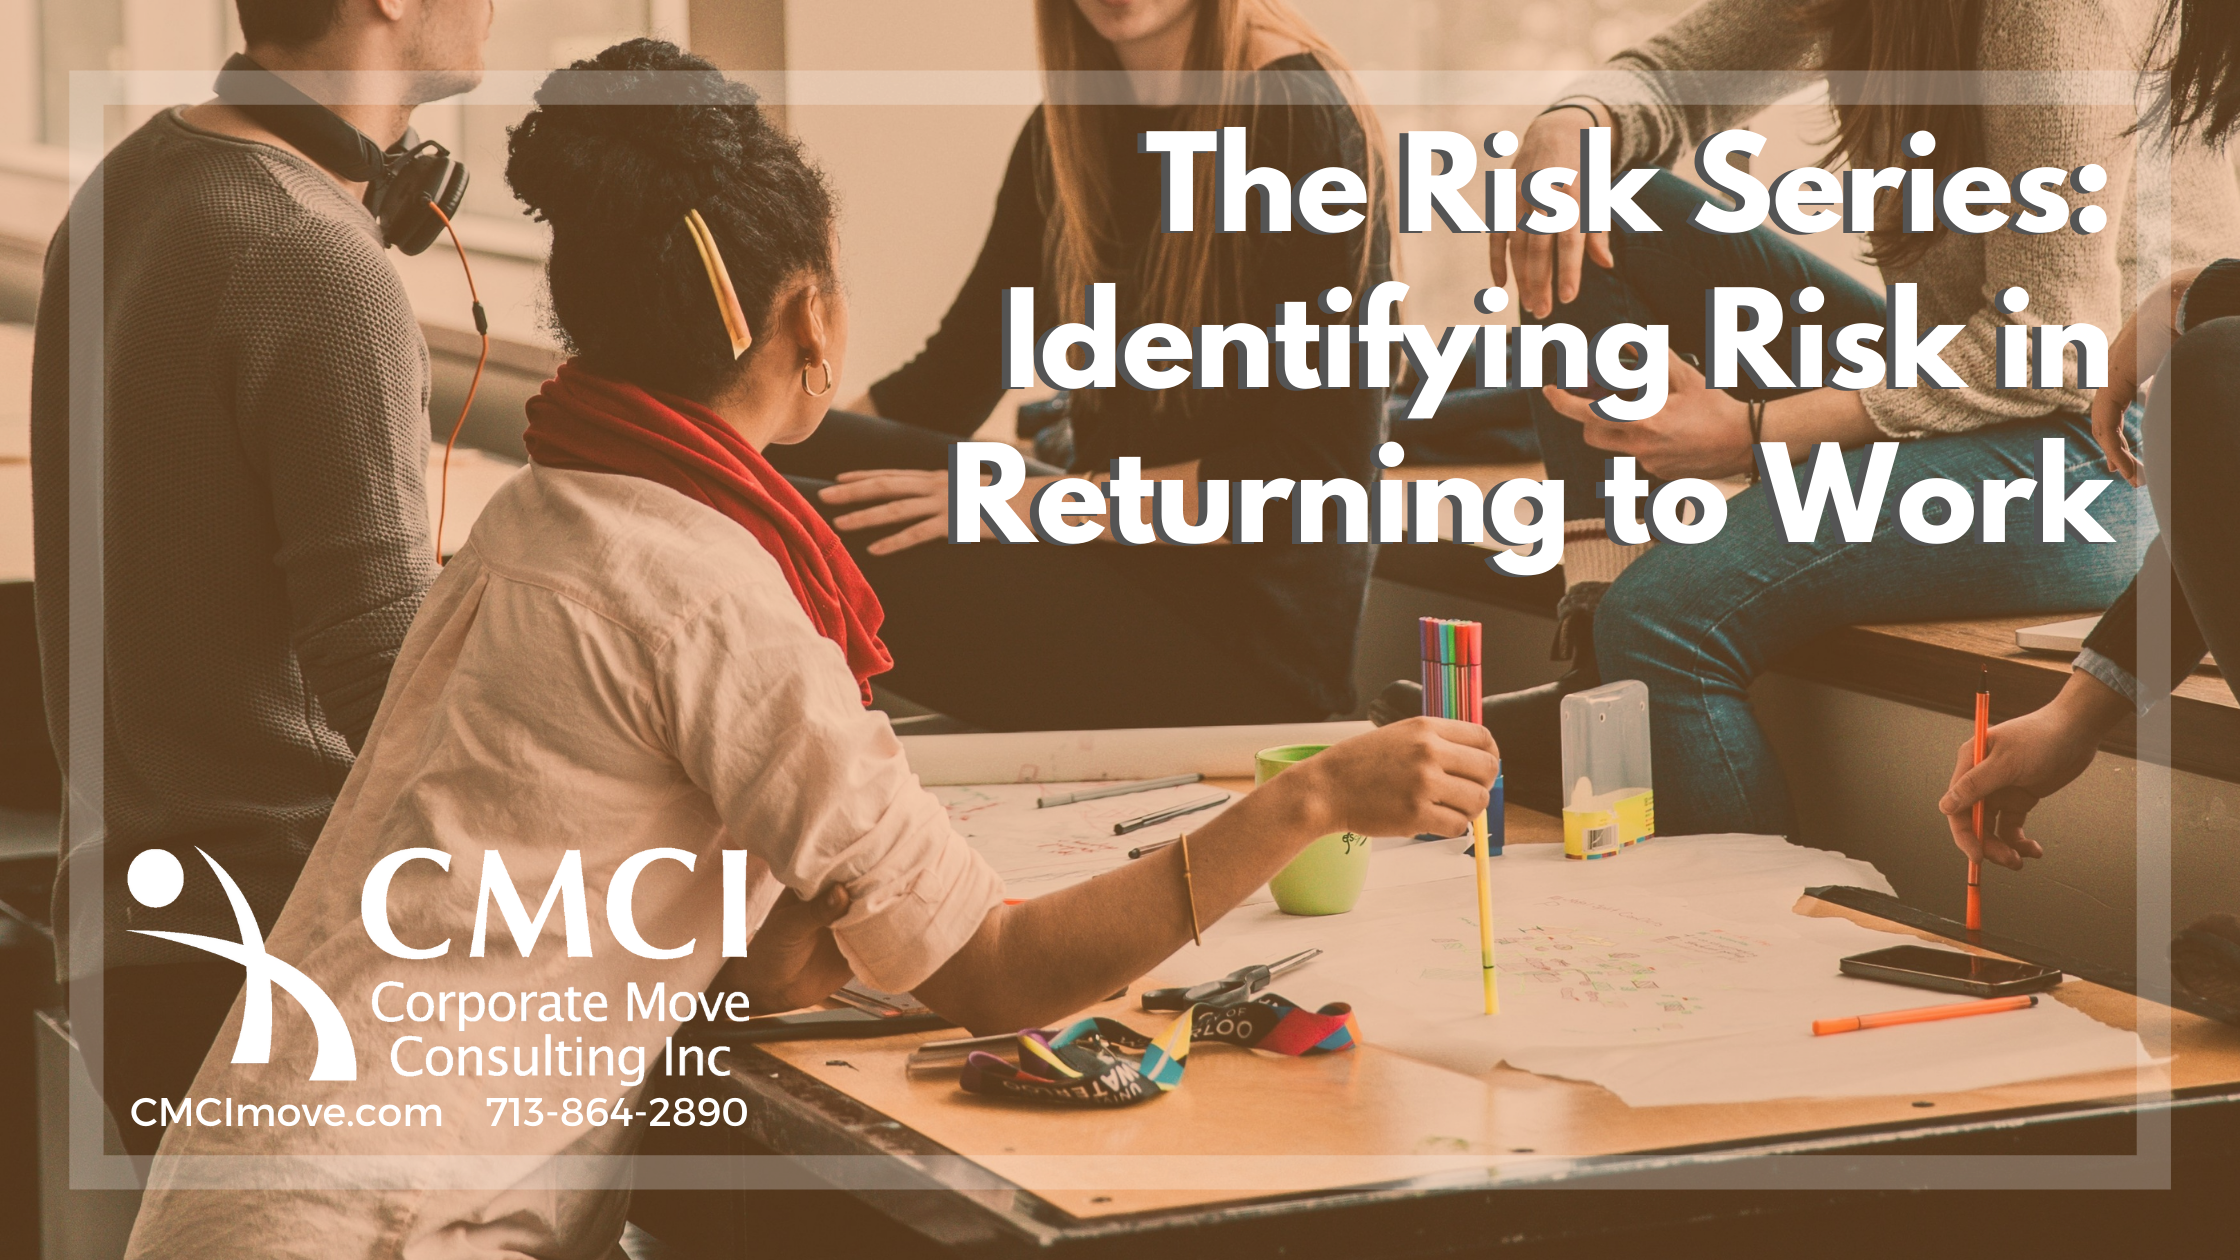 The Risk Series: Identifying Risk in Returning to Work